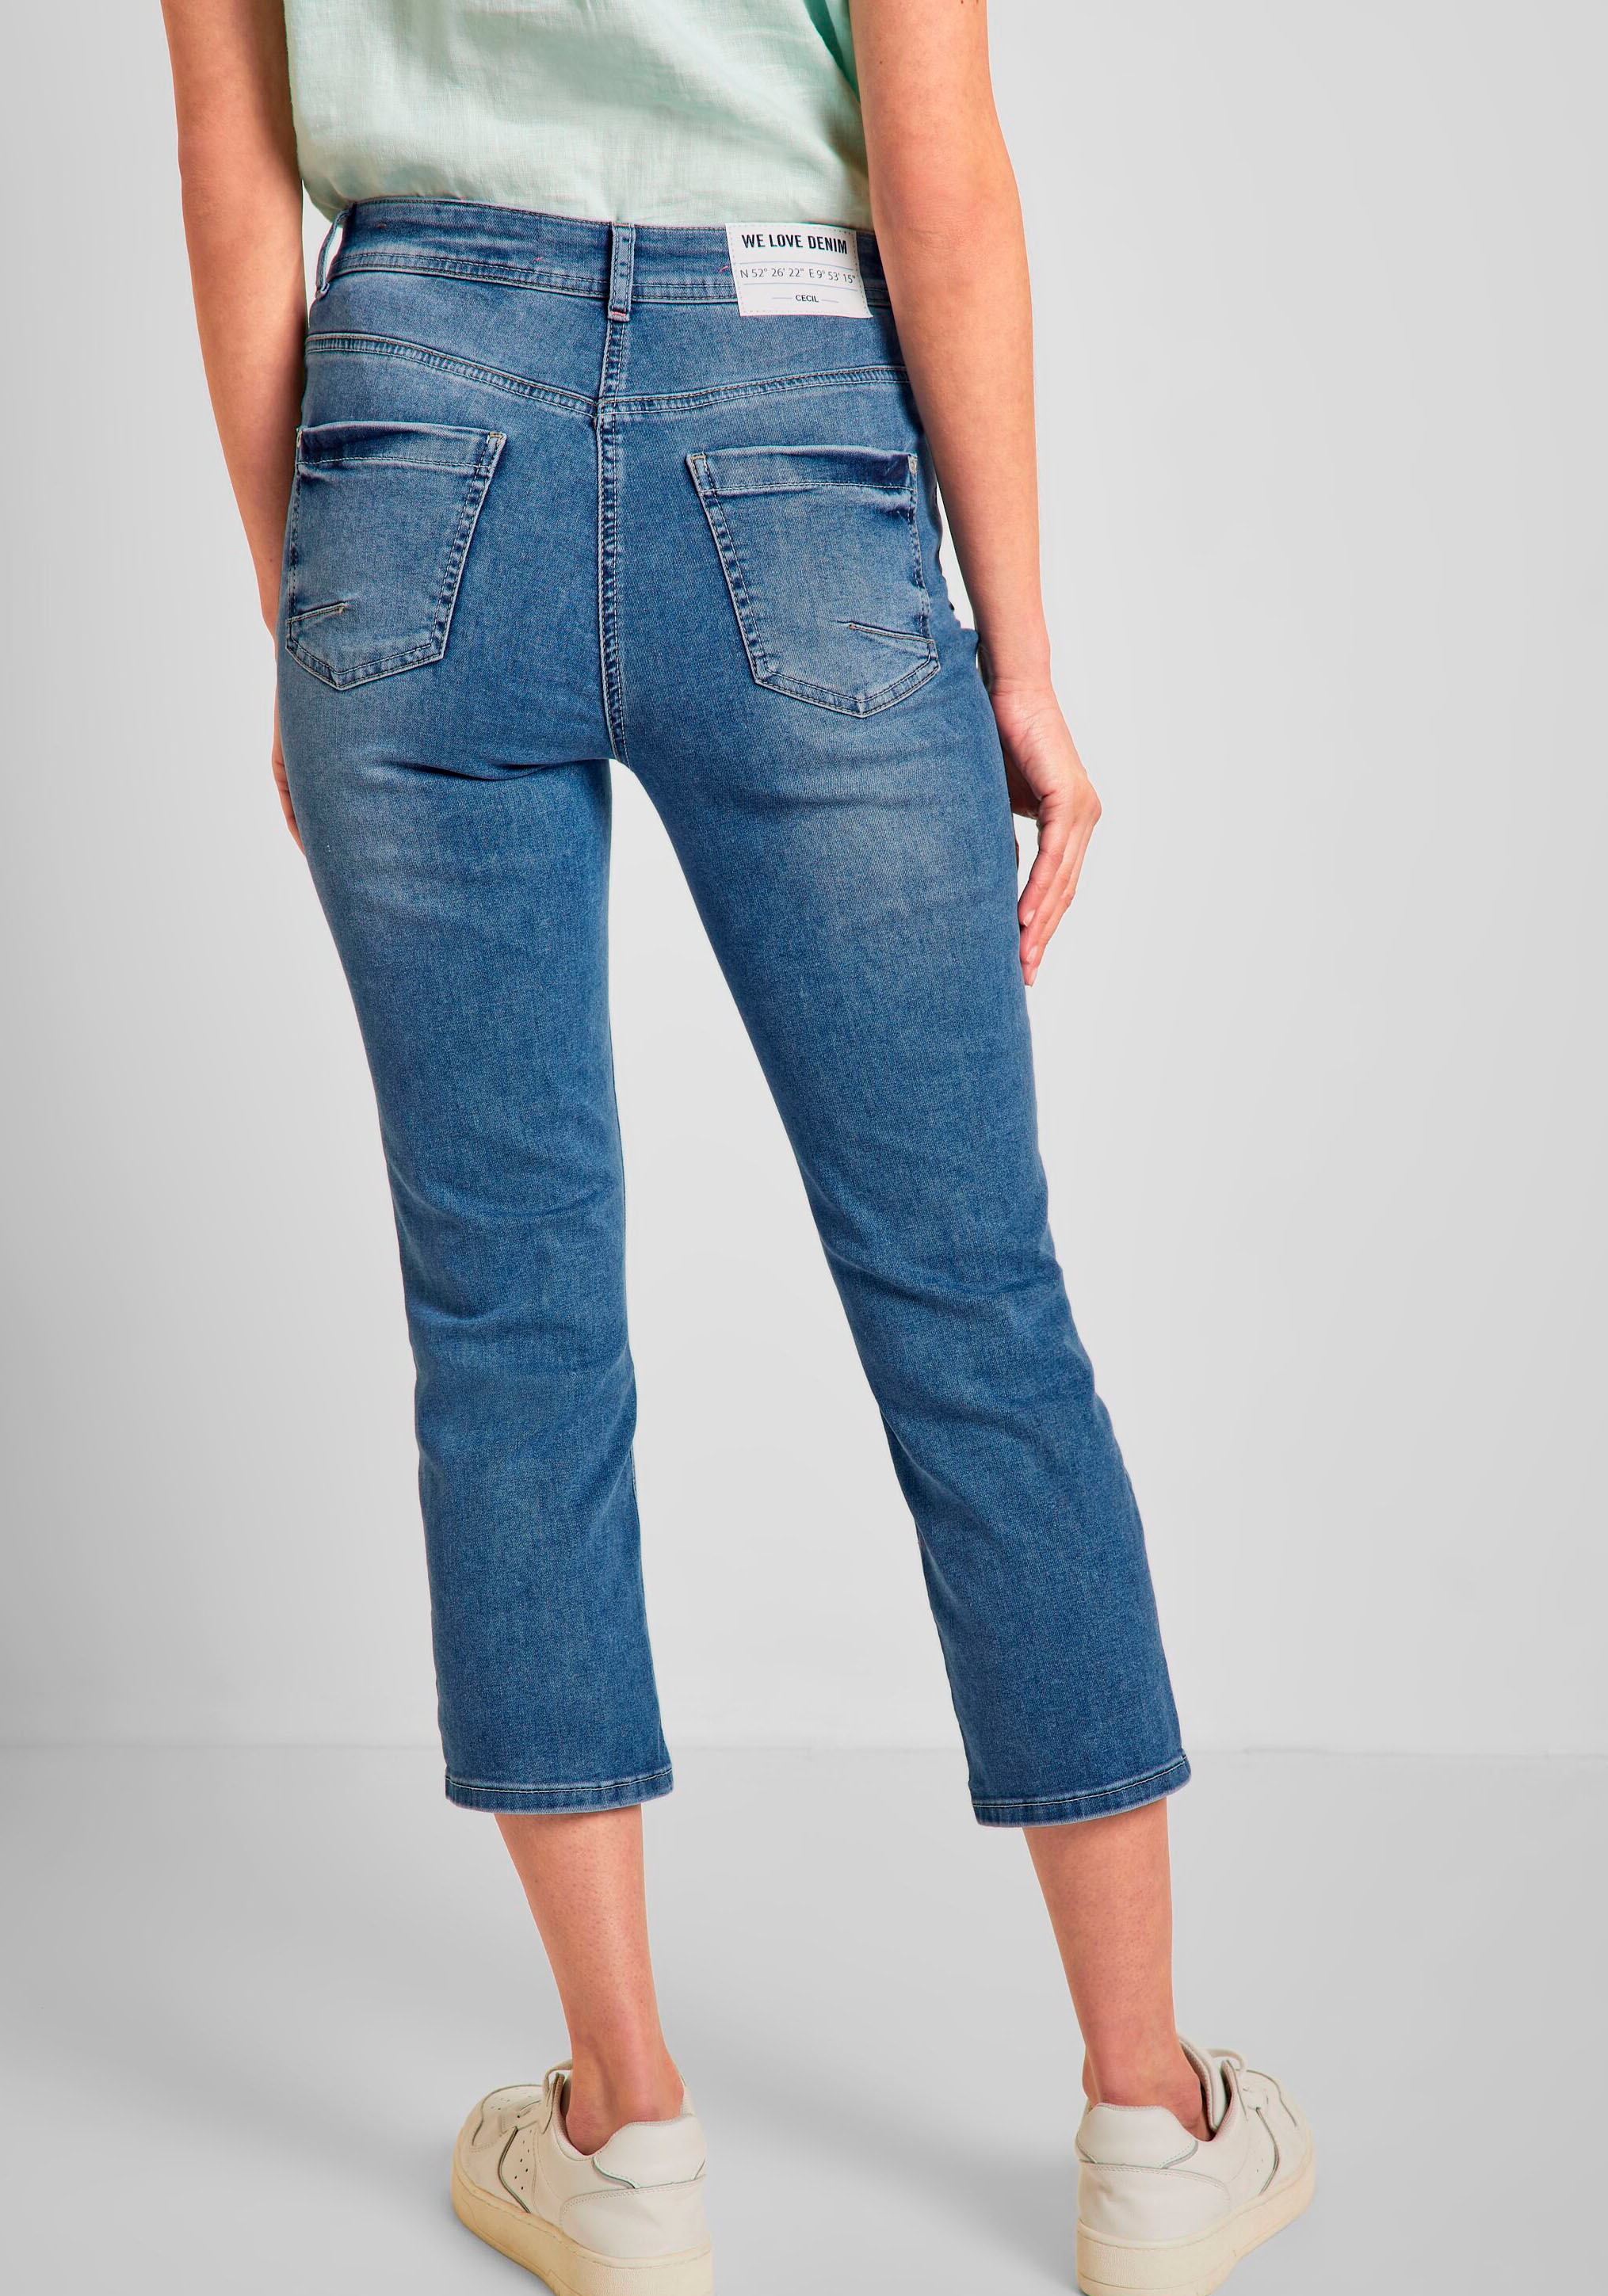 im Cecil 5-Pocket-Style OTTO 7/8-Jeans, bei